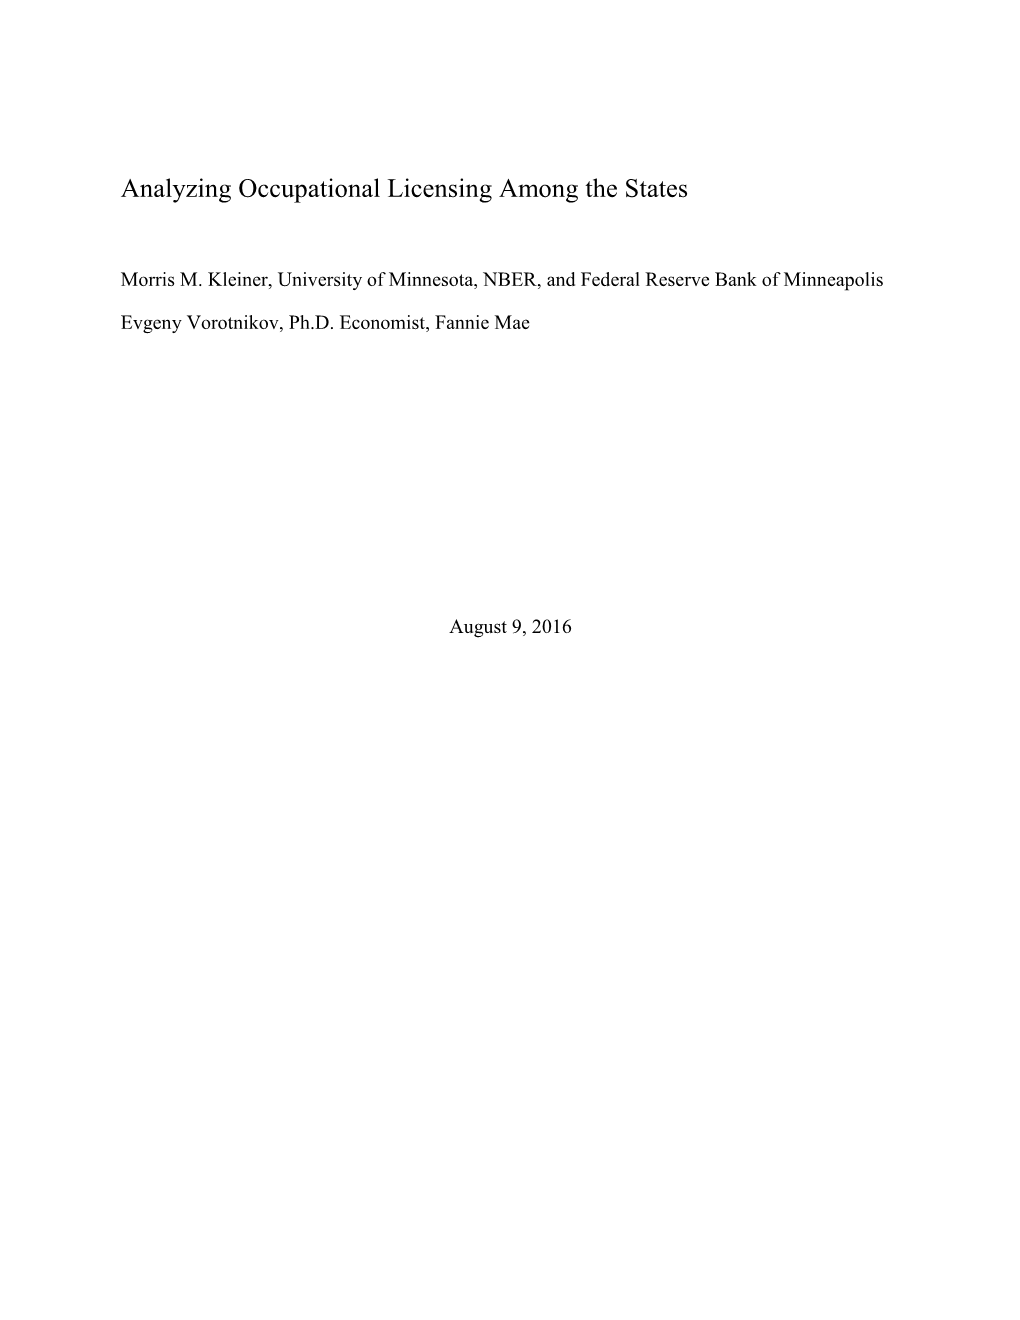 Analyzing Occupational Licensing Among the States